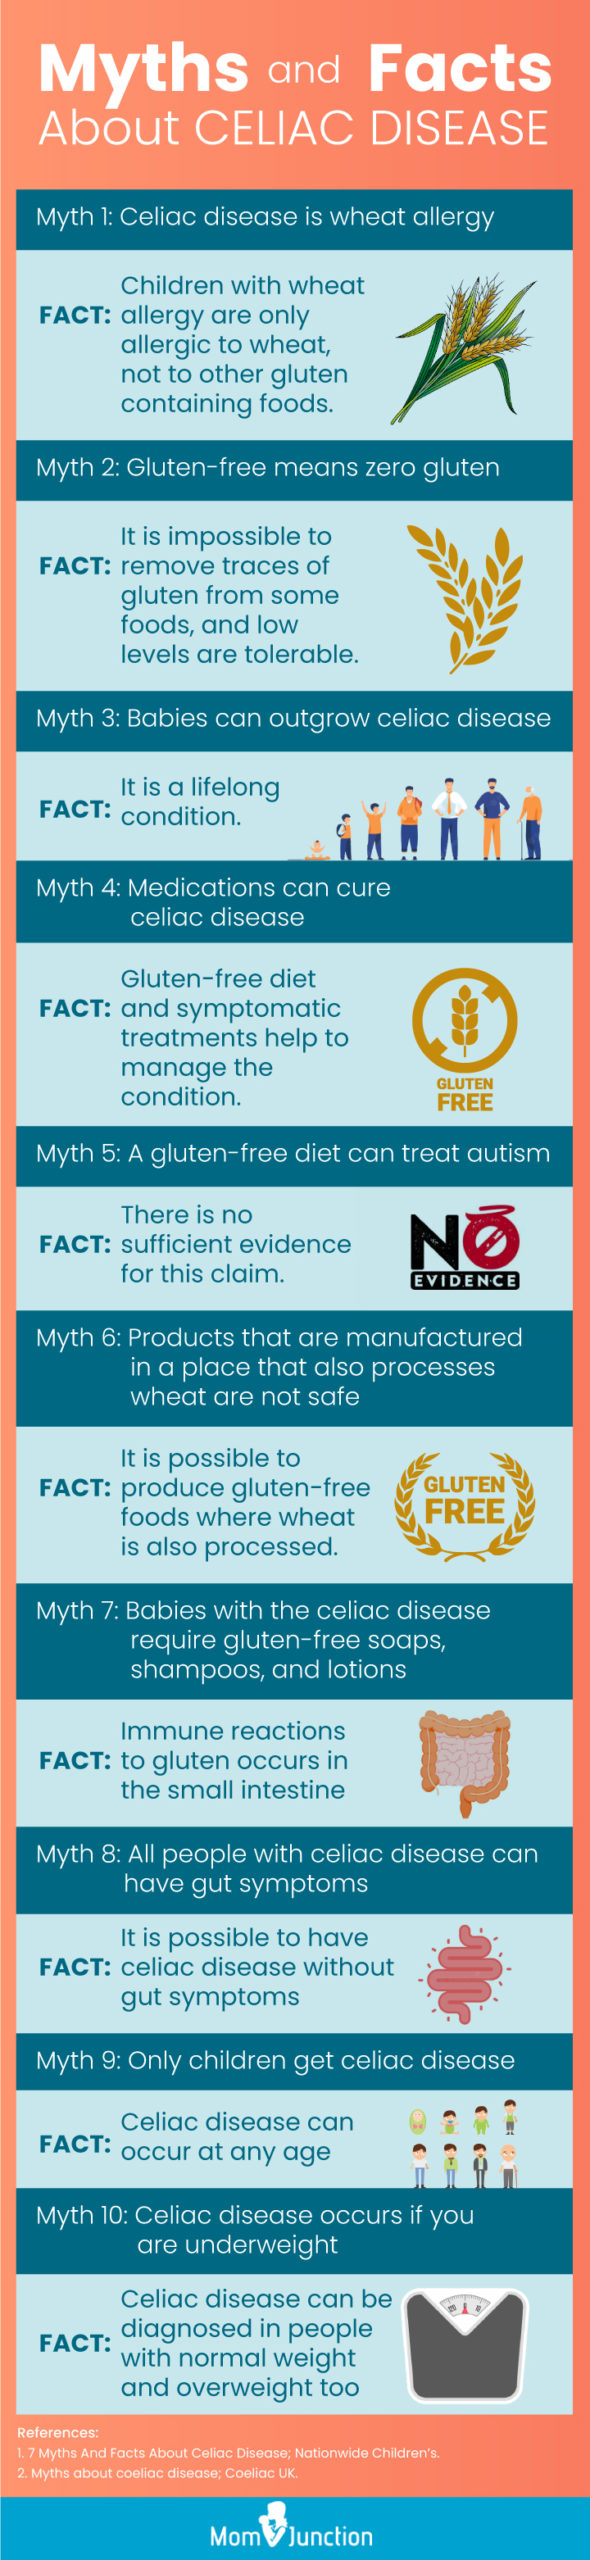 myths and facts about celiac disease [infographic]